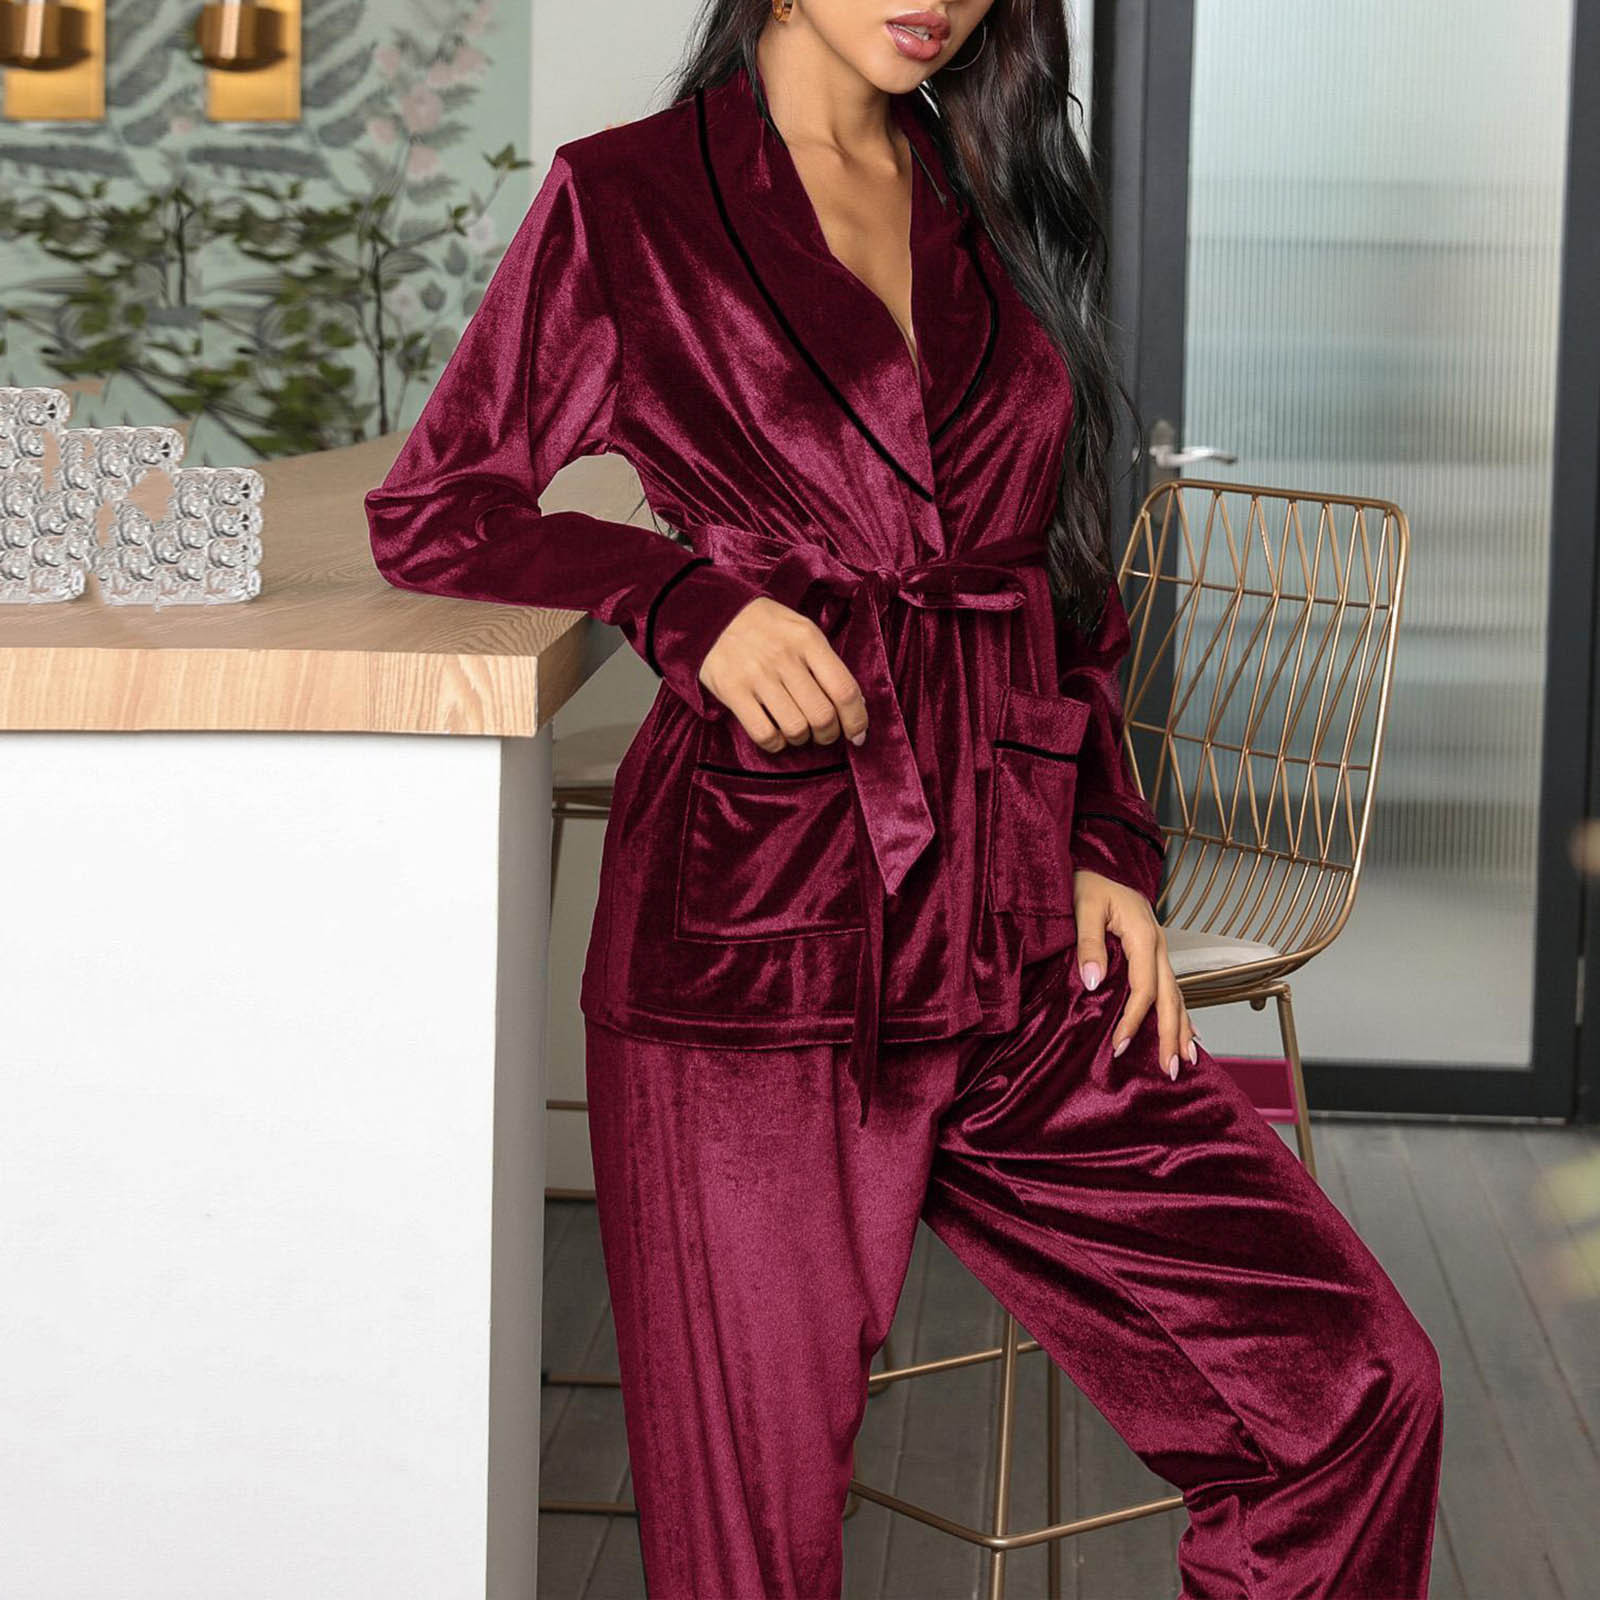 Velour Pjs for Women Sets,Ladies Velvet Pyjama Set Two Pieces Long Sleeve Casual V Neck Wrap Sweatshirt and Lounge Bottoms Nightwear Loungwear Autumn Winter Pajama Sets Sale Clearance - image 2 of 5